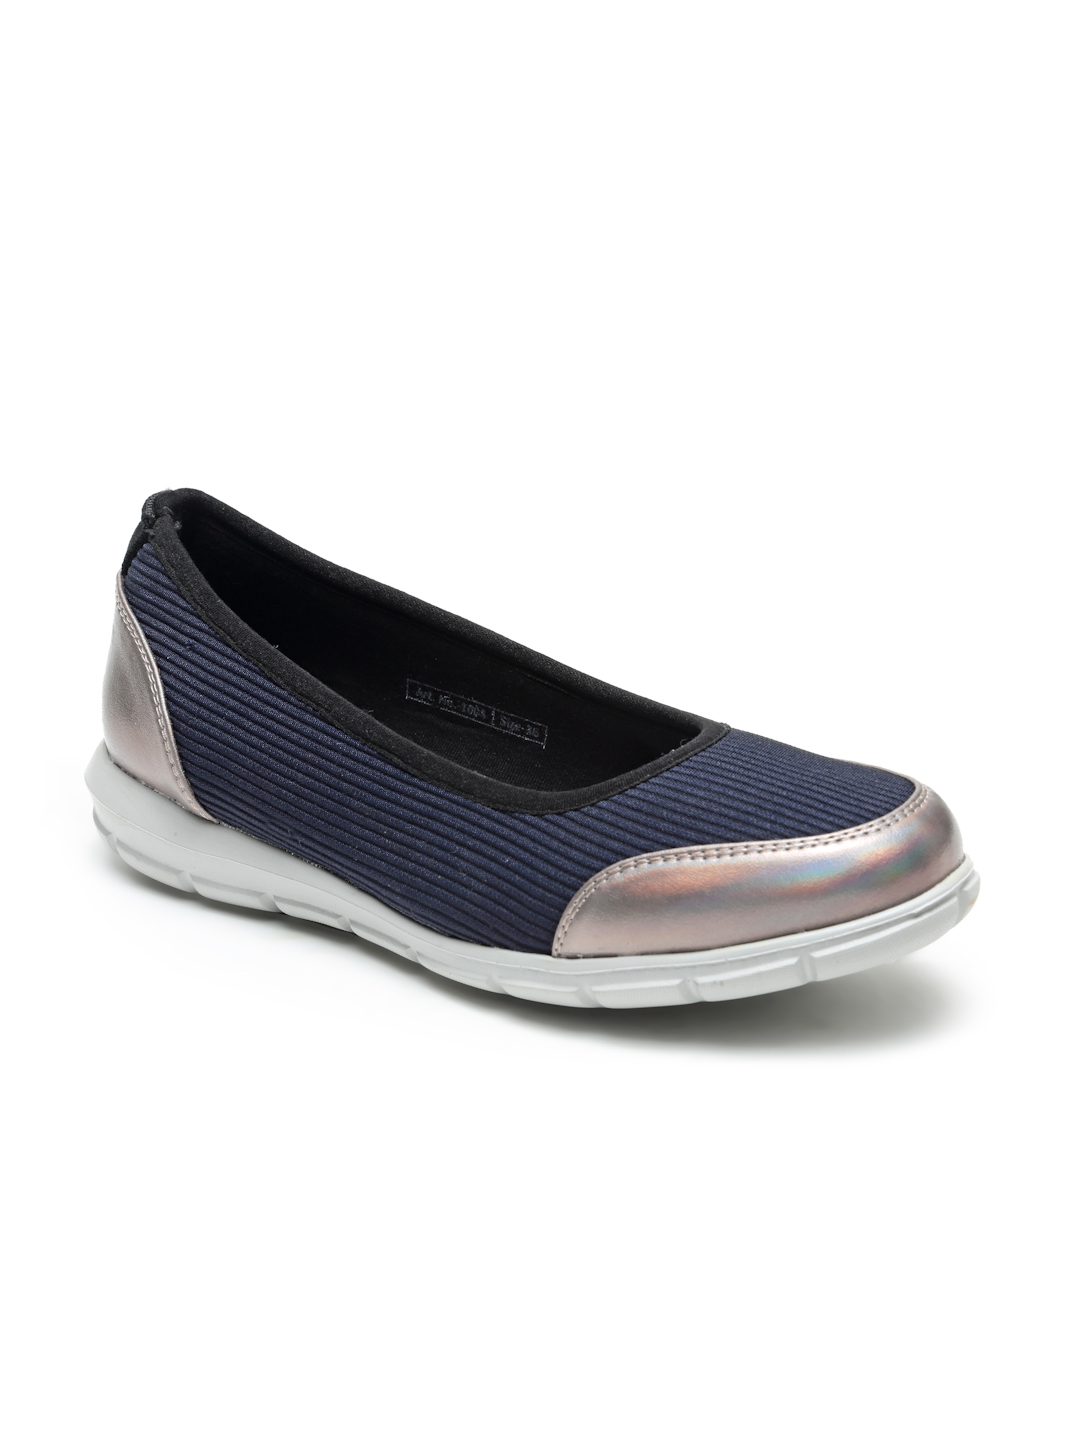 Buy Von Wellx Germany Comfort Women's Blue Casual Shoes Alice Online in Kanpur